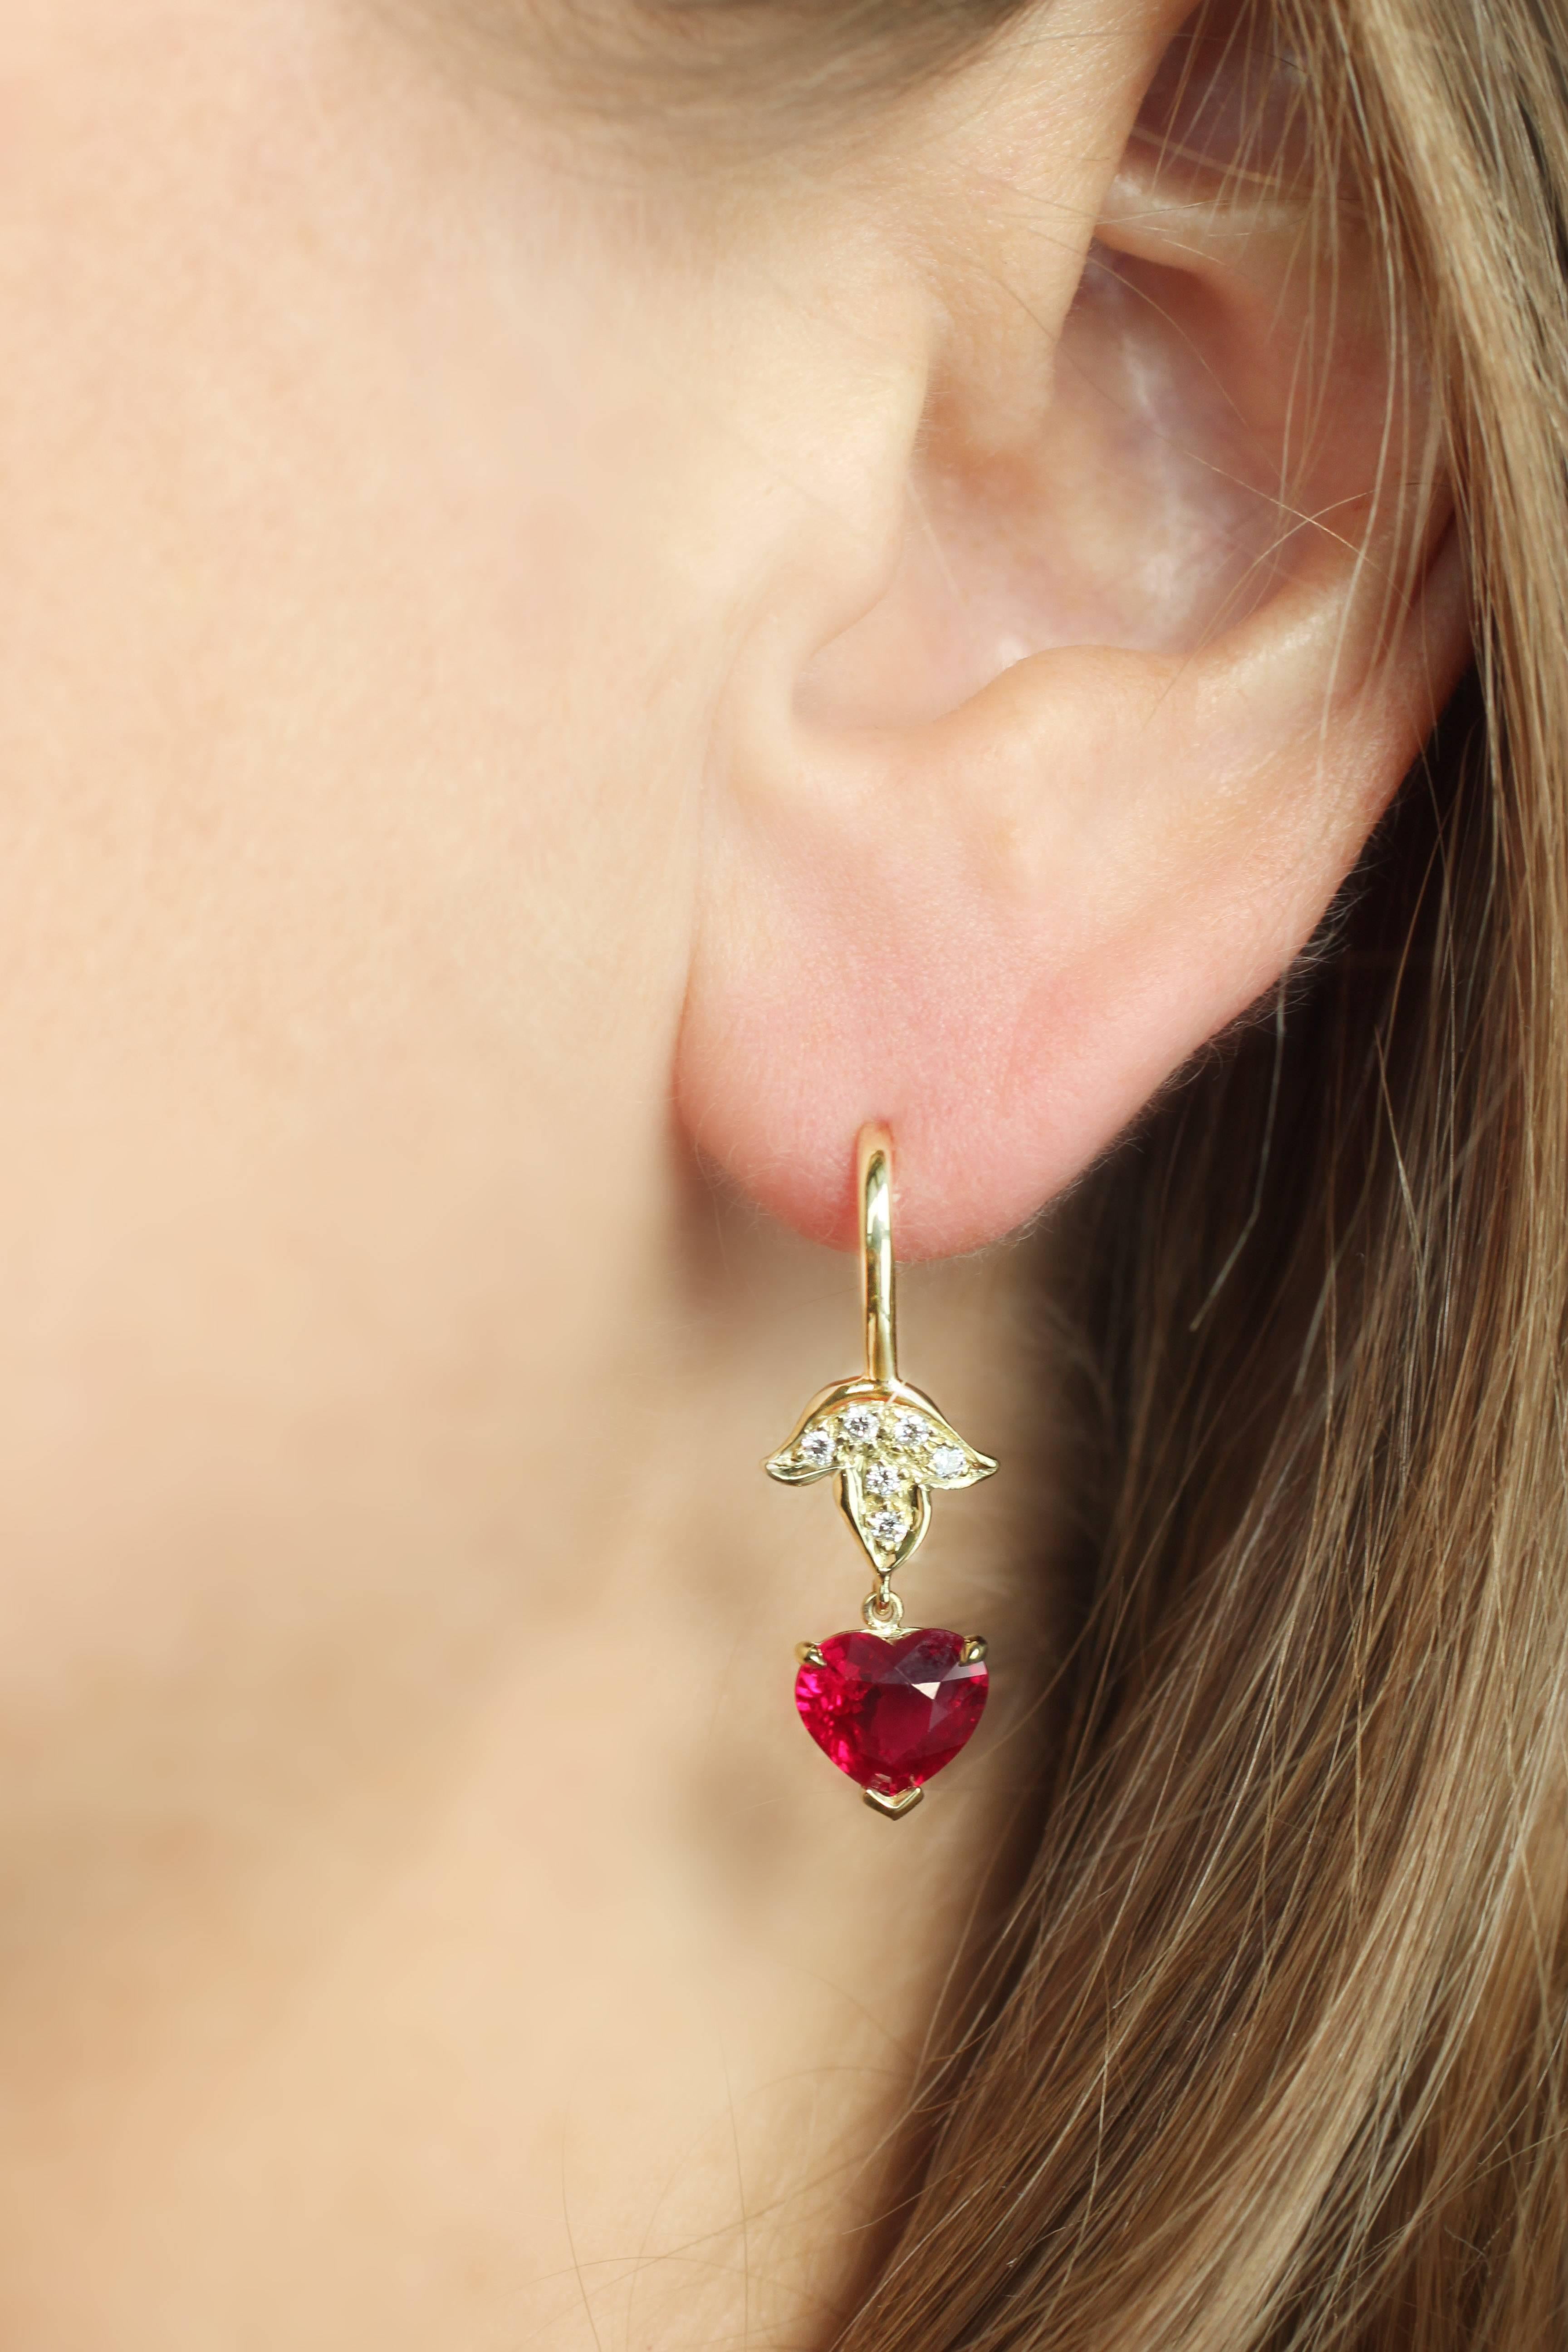 Julius Cohen classic 18 Kt Gold hanging style Leaf Earrings with White Diamond pave leaf motif tops (12 brilliant White Diamonds for the pair).  These beautiful earrings contain two Heart Shape Burmese Ruby Drops (3.97 Cts. for the pair). GIA